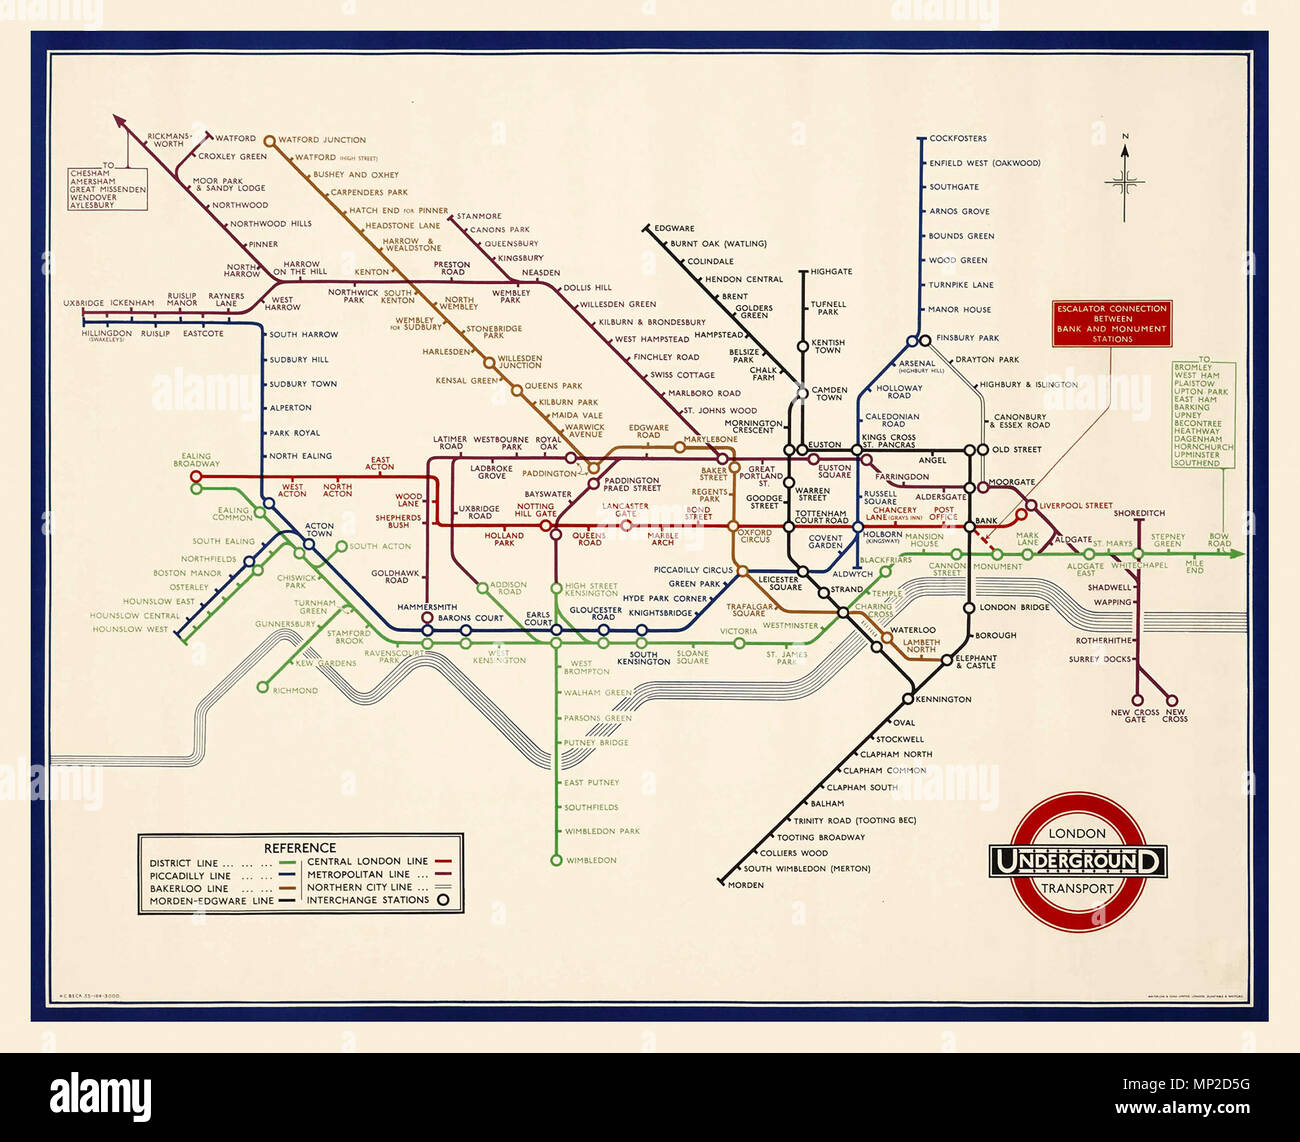 VINTAGE 1930’s LONDON UNDERGROUND TUBE MAP by H C BECK lithograph in colour 1935, printed by Waterlow & Sons Limited, London, Harry Beck's London Underground Tube map has become a design classic. Original 1933 Tube map recognised across the world, the Tube map was originally the brainchild of Underground electrical draughtsman, Harry Beck, who produced this imaginative and beautifully simple design. Stock Photo